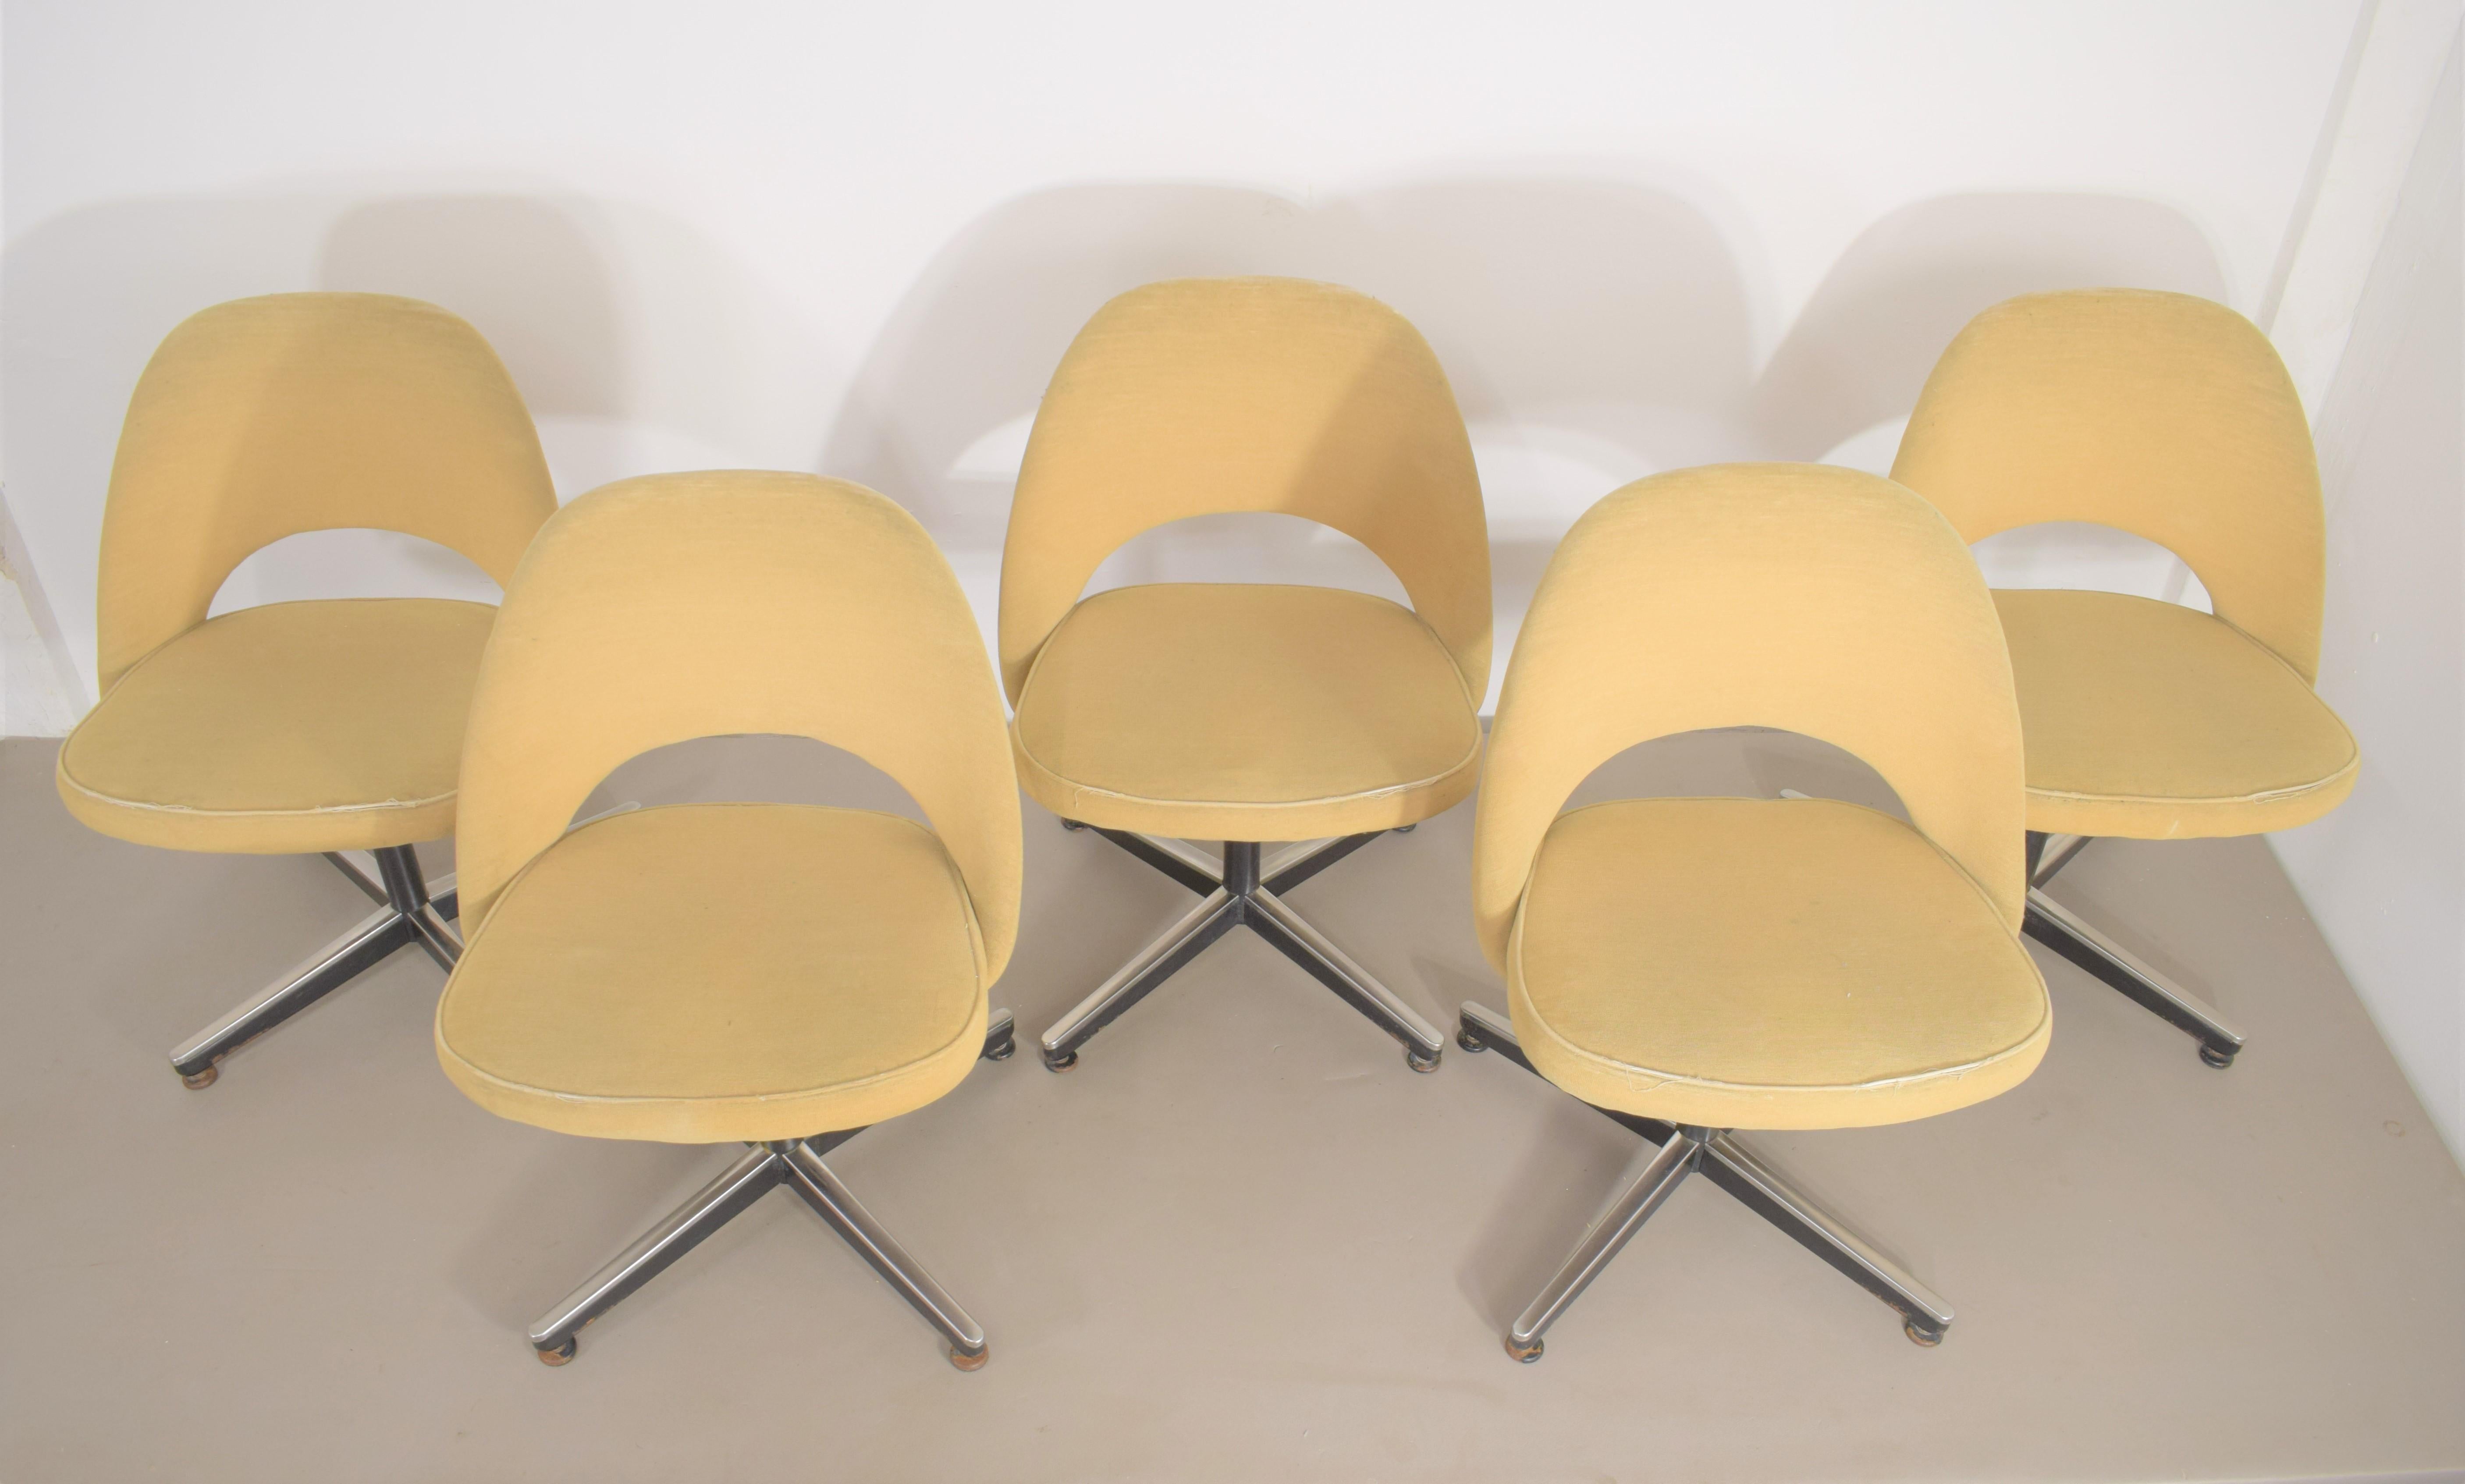 Set of 5 Italian armchairs by Eero Saarinen for Knoll, 1970s.
Dimensions: H= 81 cm; W= 56 cm; D= 51 cm; H seat= 47 cm.